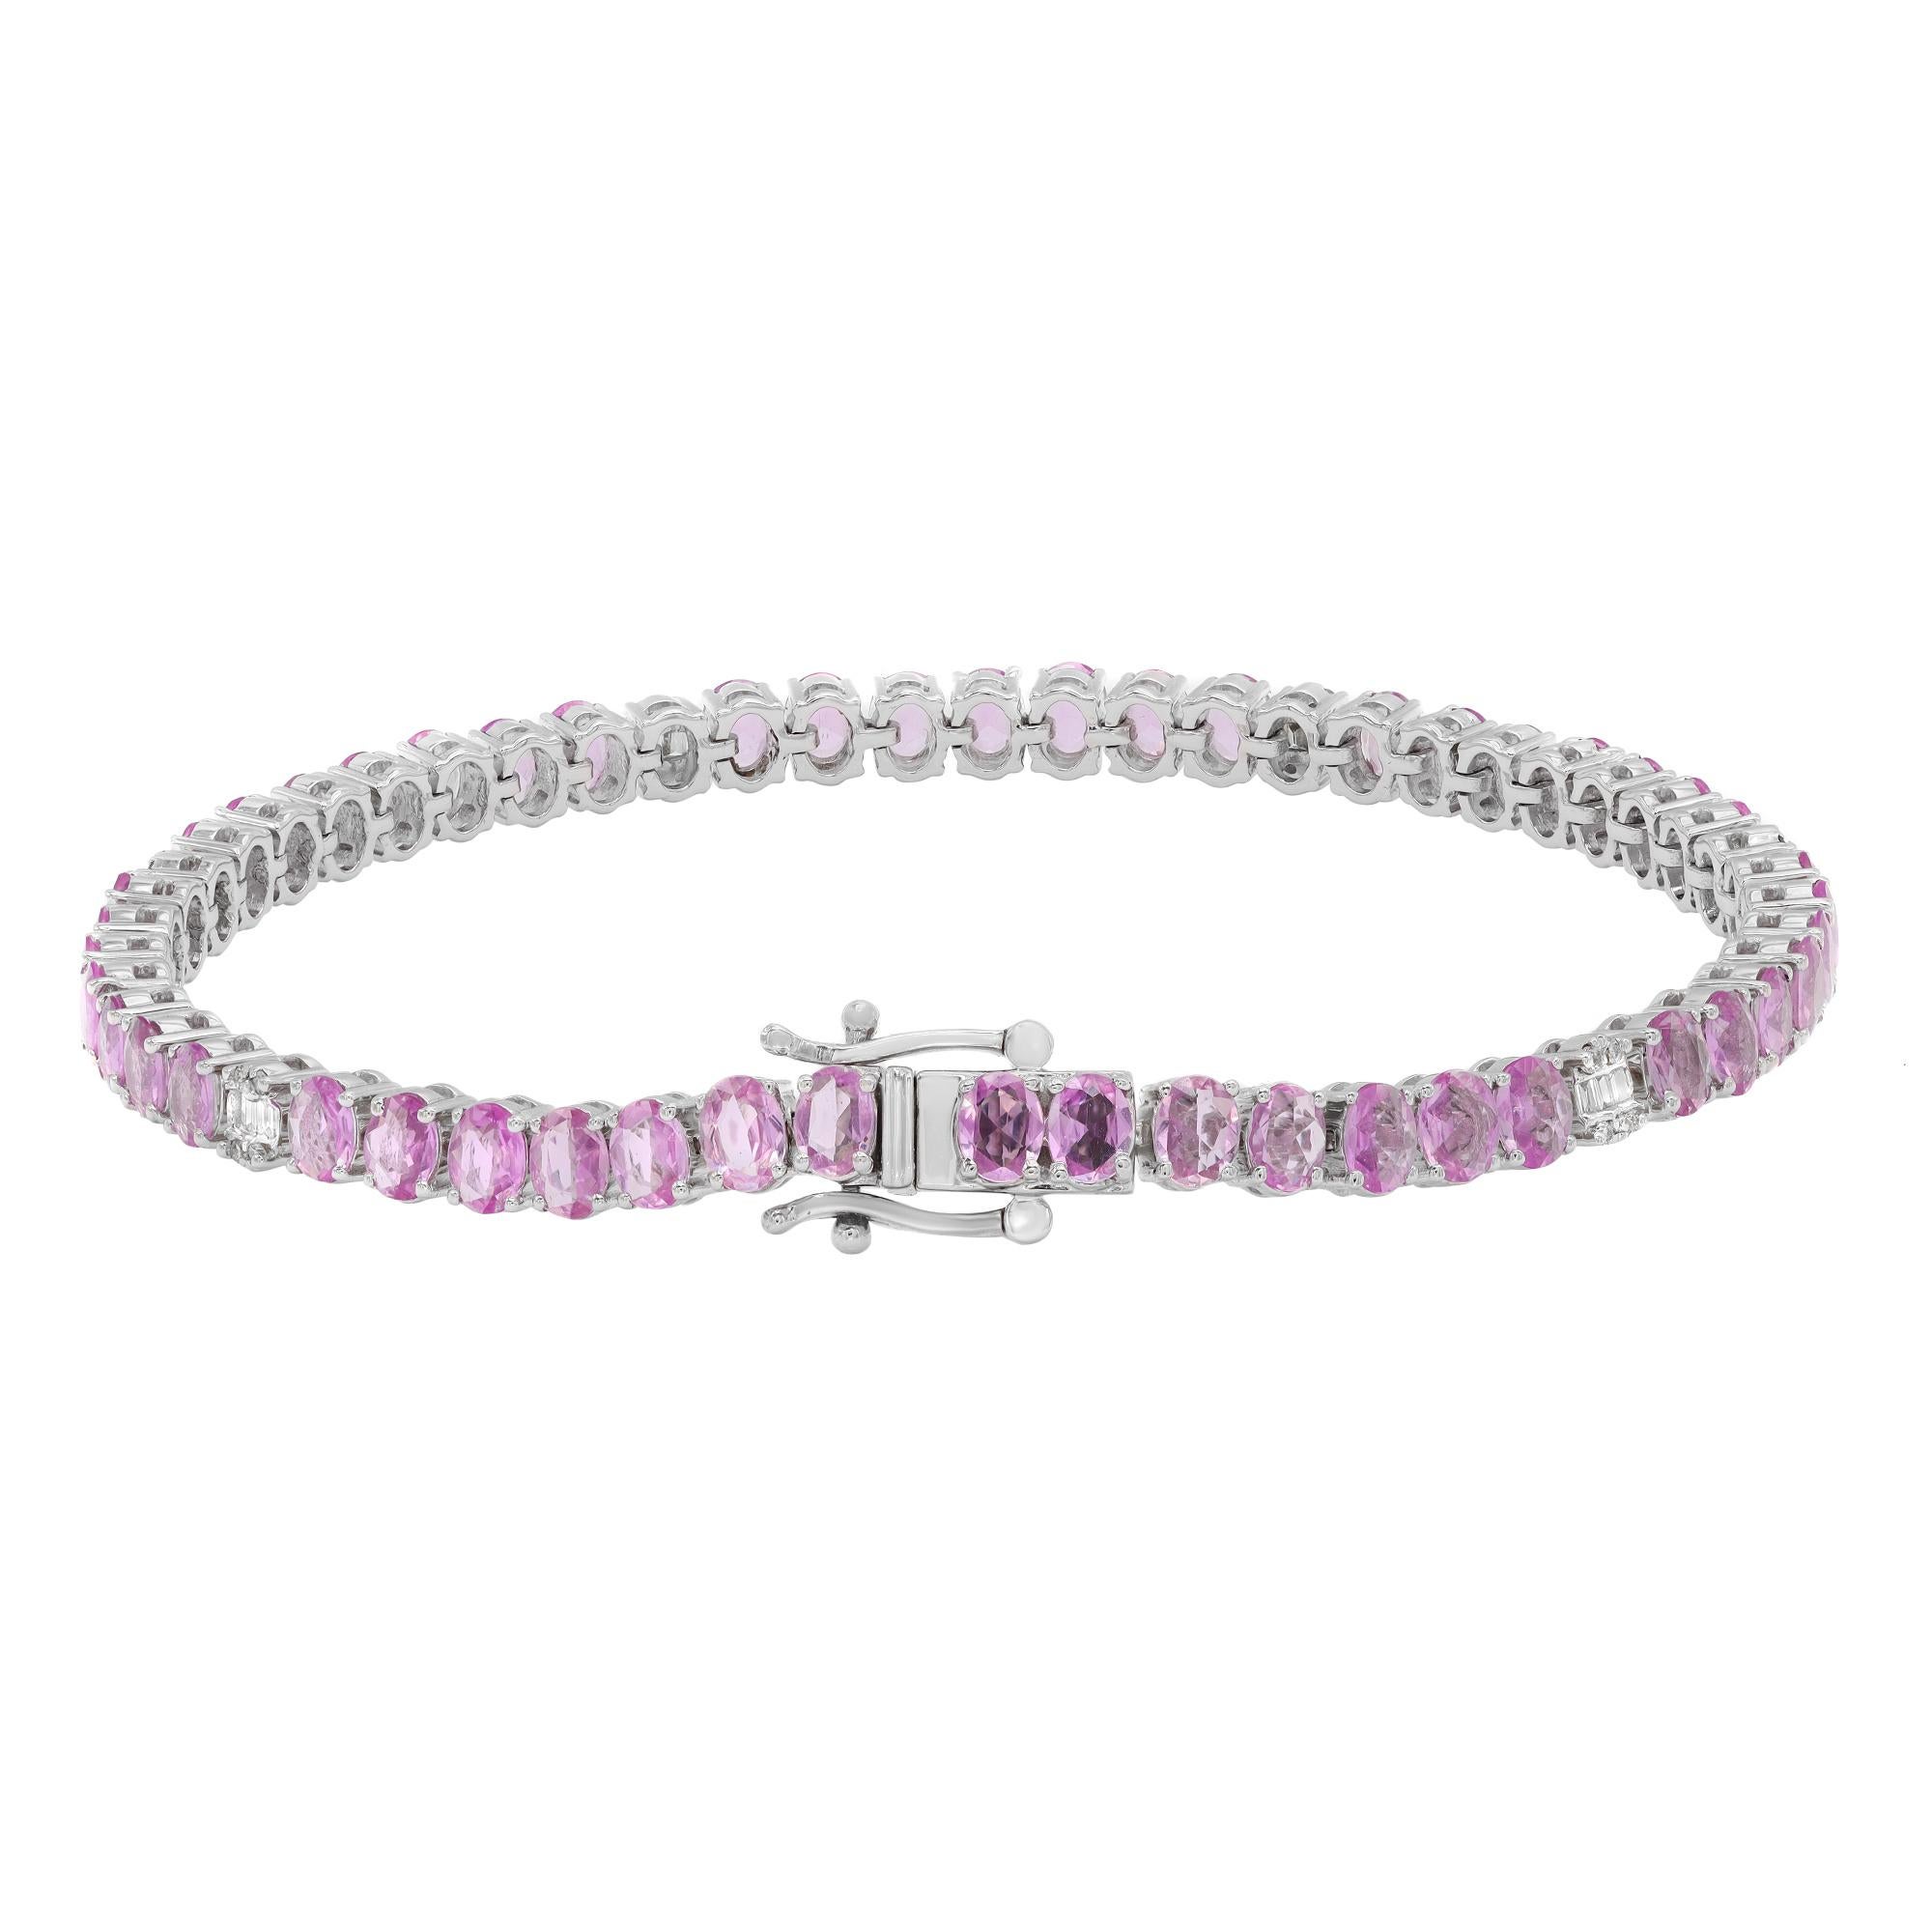 This beautifully crafted tennis bracelet features oval shaped pink Sapphires with tiny baguette and round cut diamonds in prong and channel setting. Crafted in 14k white gold. Total diamond weight: 0.24 carats. Diamond Quality: G-H color and SI